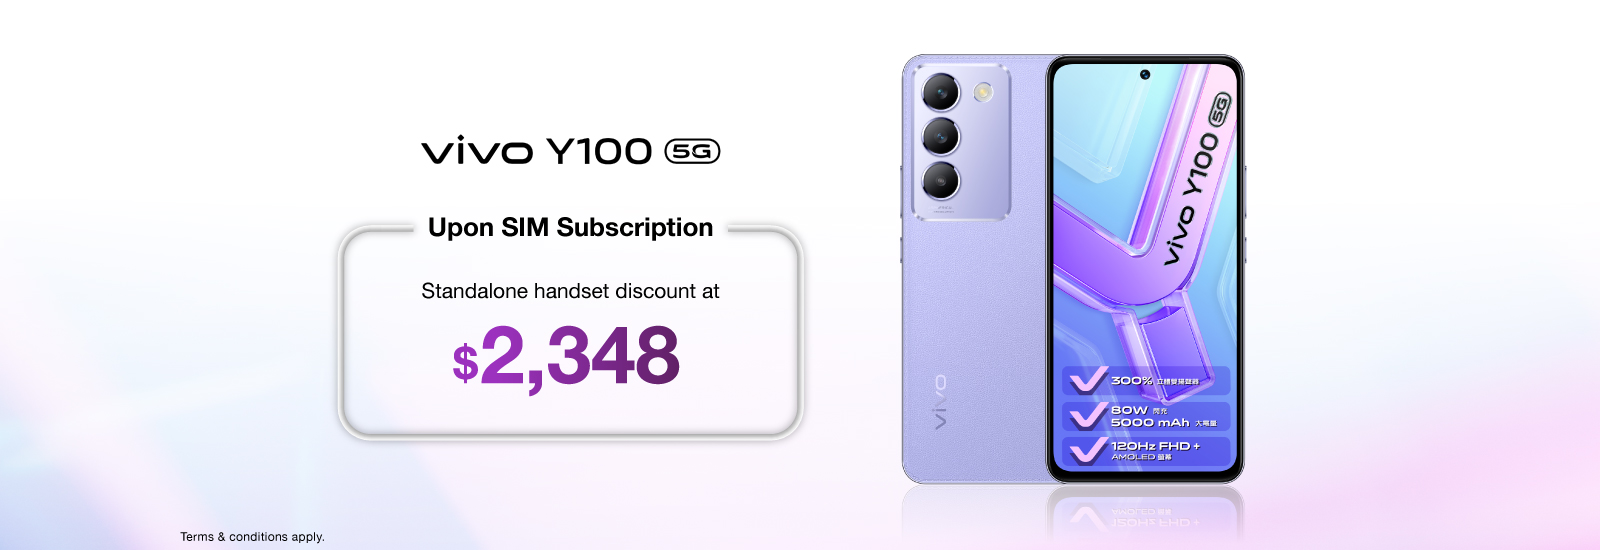 Handset special price at $2,348 upon SIM Subscription / contract renewal